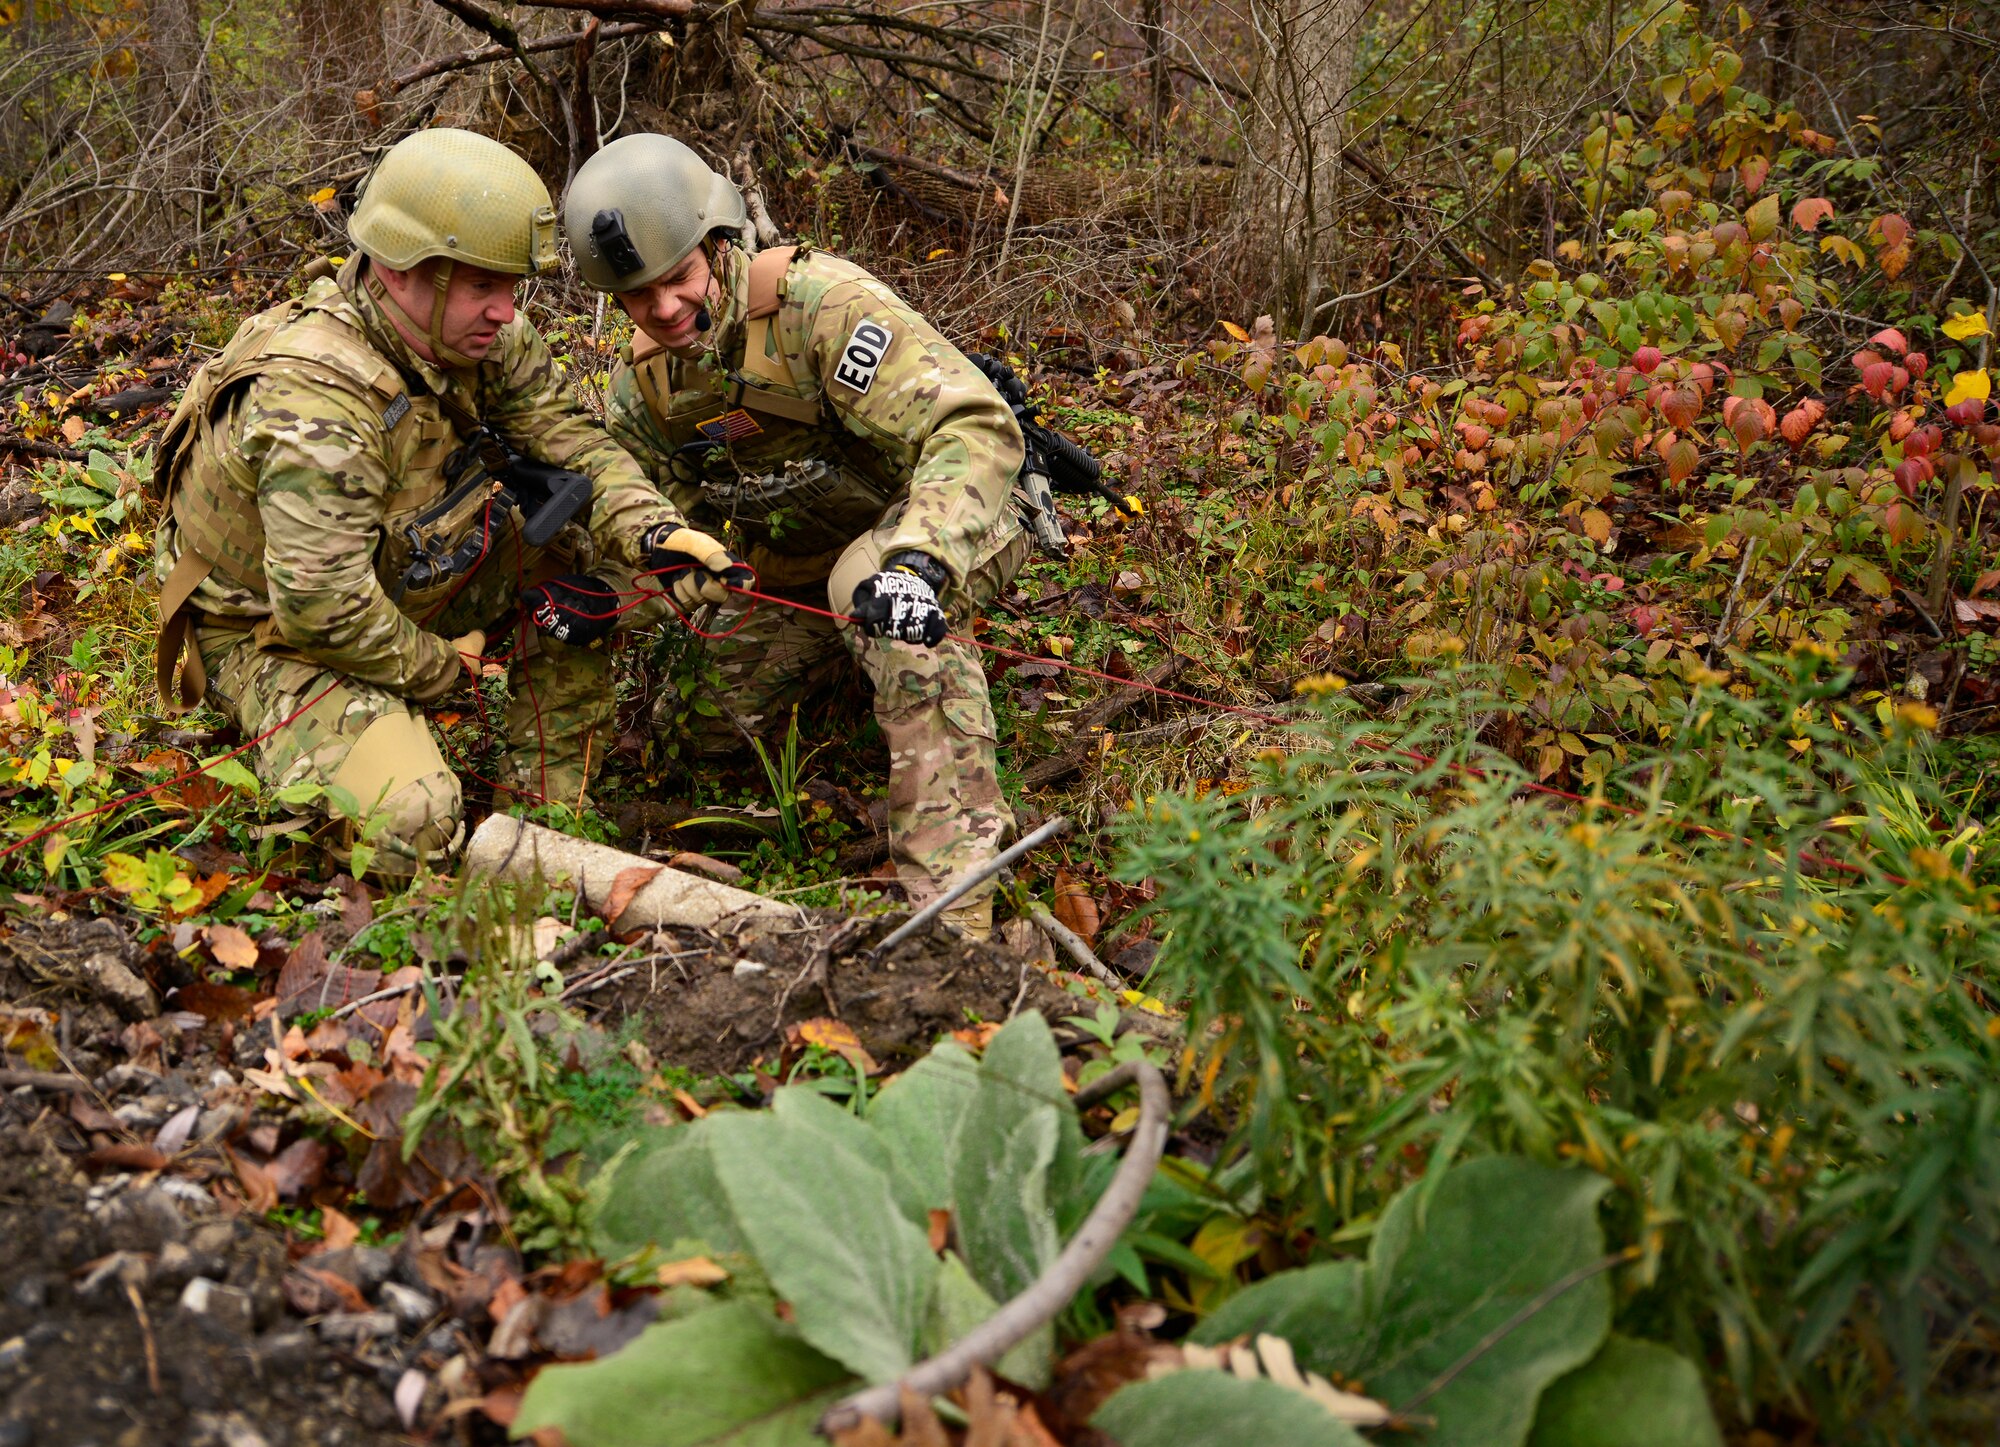 Airmen of the 914th Explosive Ordnance Disposal Squadron conduct training on mock improvised explosive devices during a joint exercise with the 914th Security Forces Squadron, at the Niagara Falls Air Reserve Station N.Y. on November 1, 2014. Members of the 914th EOD, along with personnel from the 914th Security Forces Squadron participated in the day-long exercise which combined the unique expeditionary combat skills of each squadron and allowed members the opportunity to observe the other’s practices and procedures. 